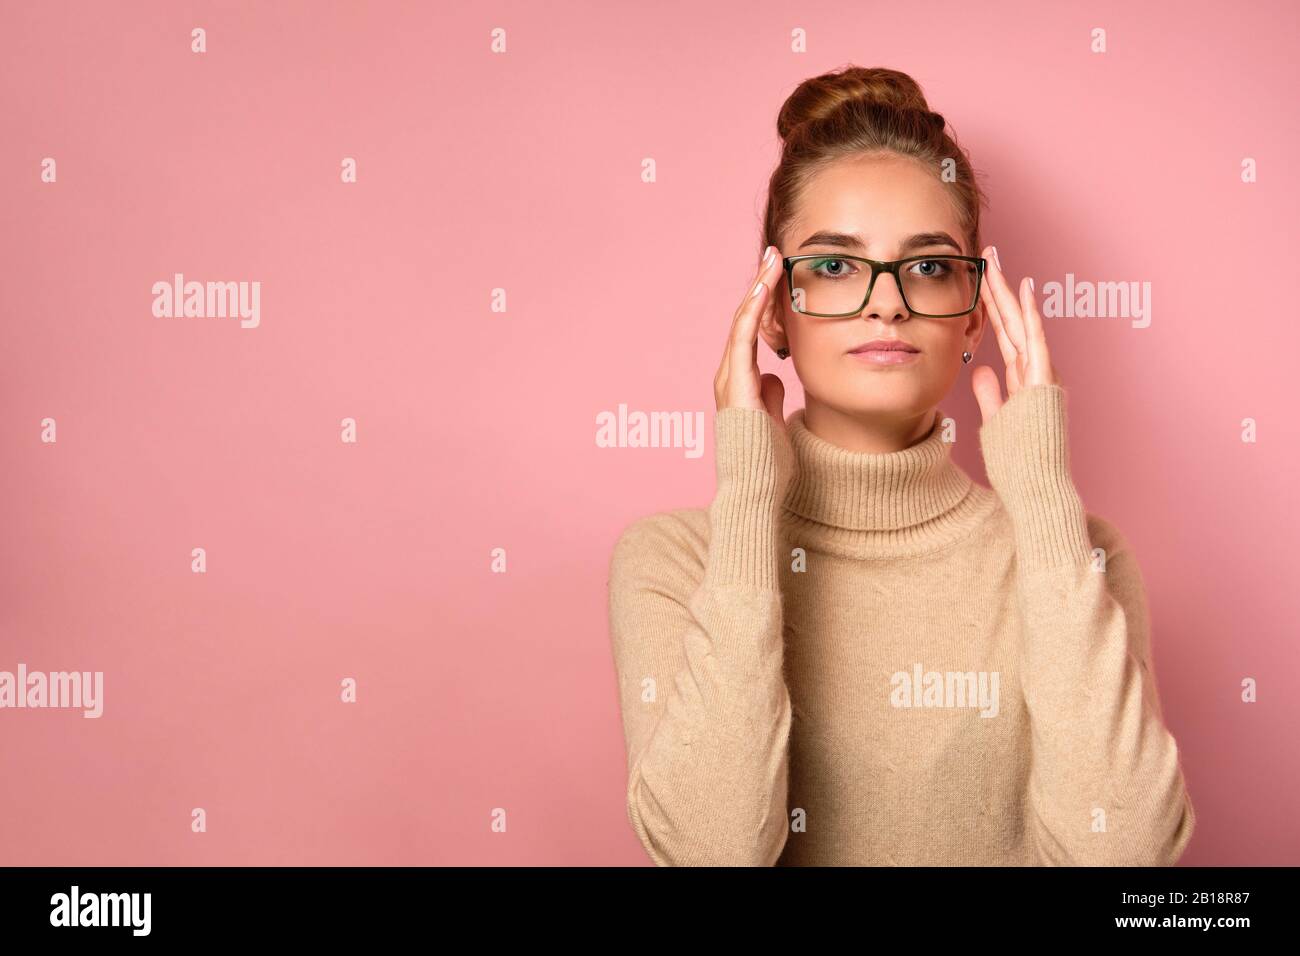 A girl with clean skin and a high bun stands on pink background and looks into the frame, adjusting her glasses with her fingers. Stock Photo